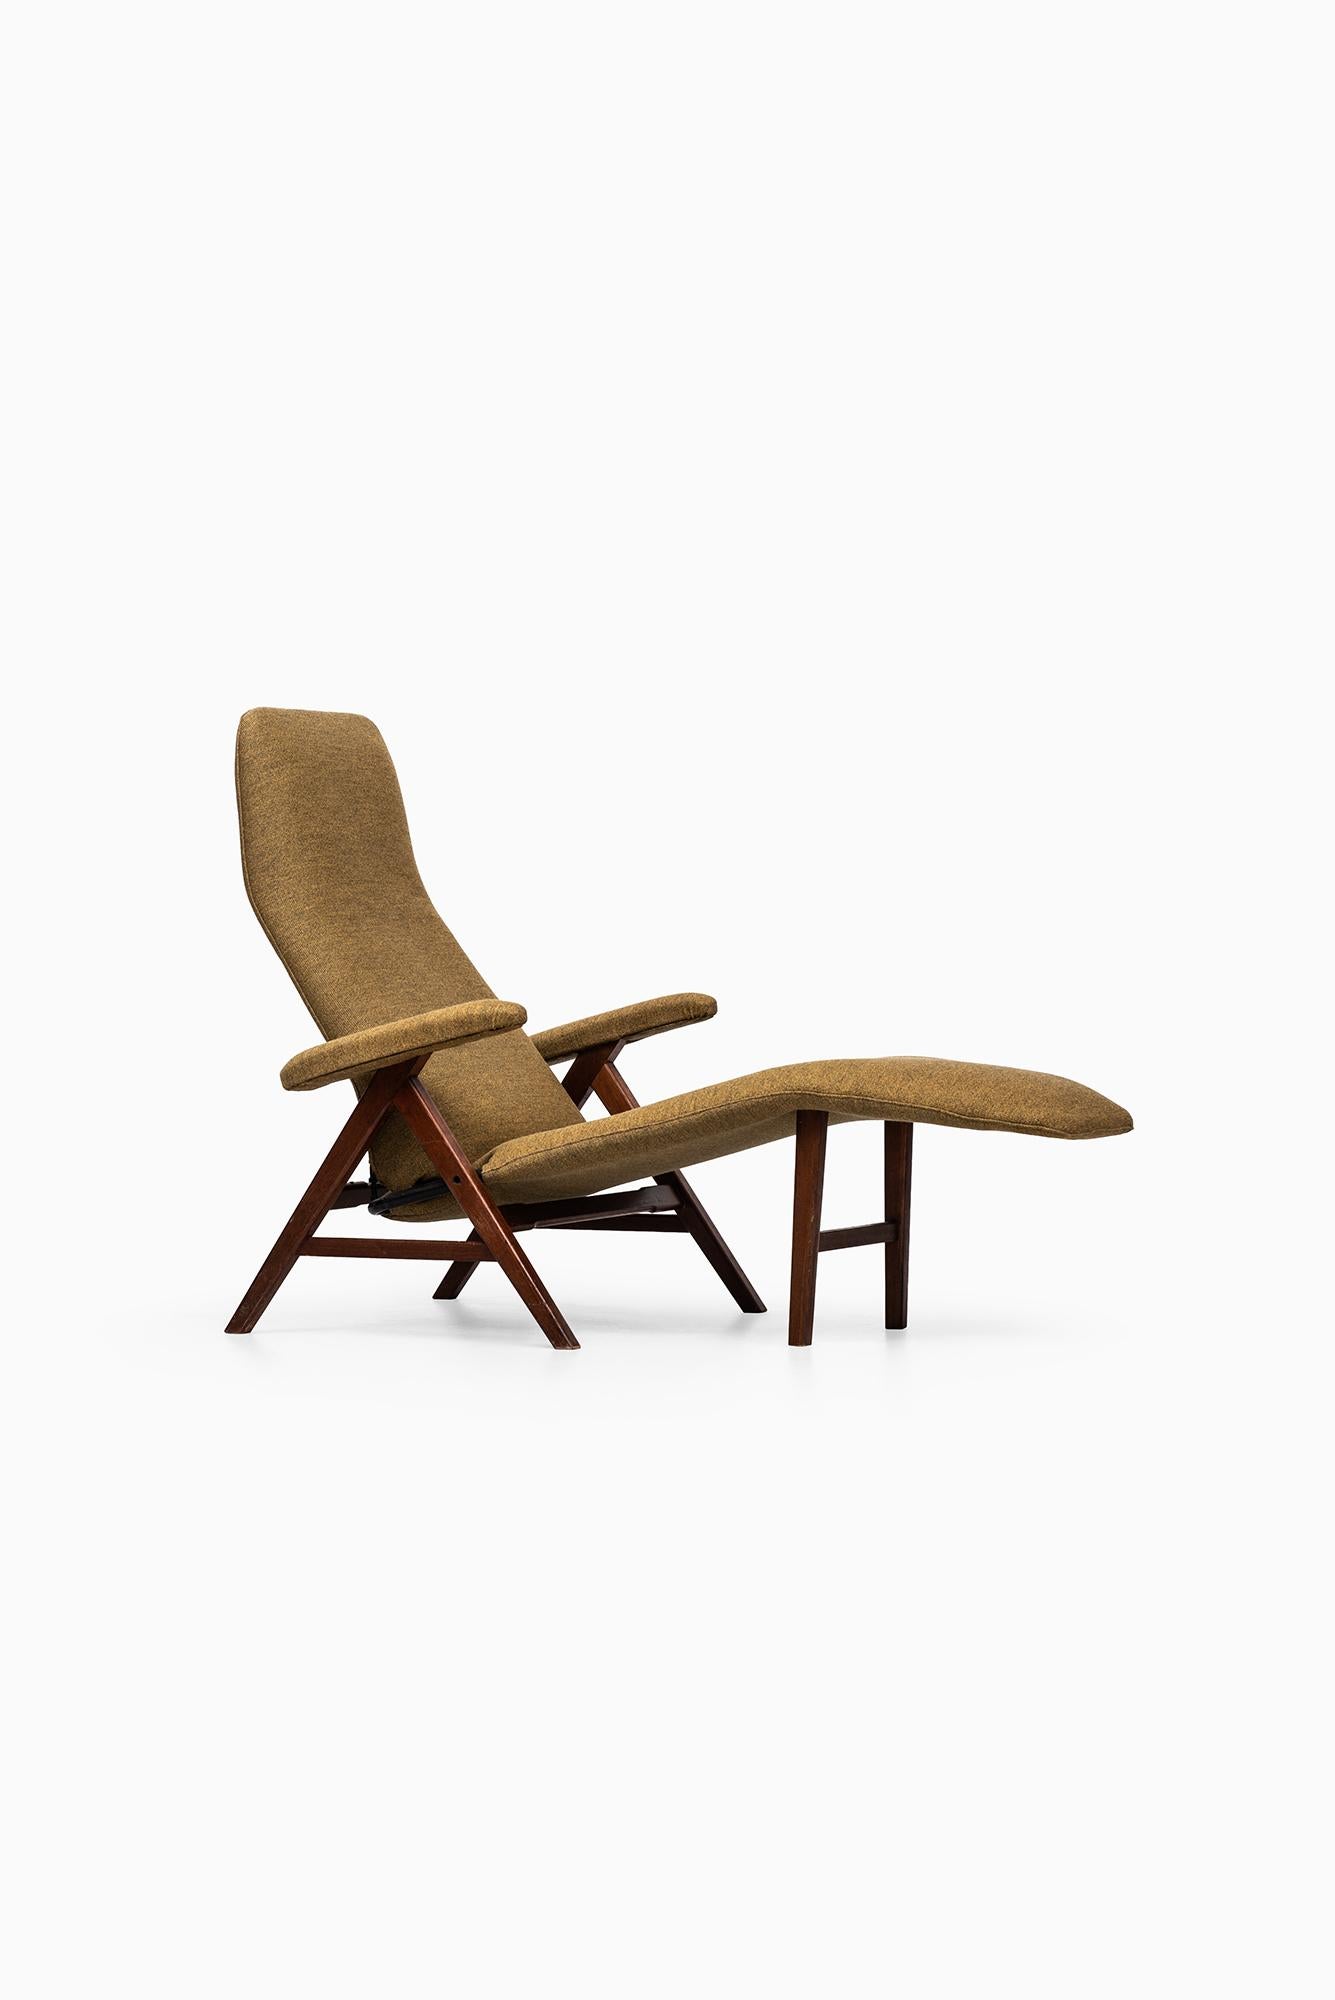 Rare reclining chair designed by Henry Walter Klein (H.W Klein). Produced by Bramin Møbler in Denmark. Two adjustable positions.